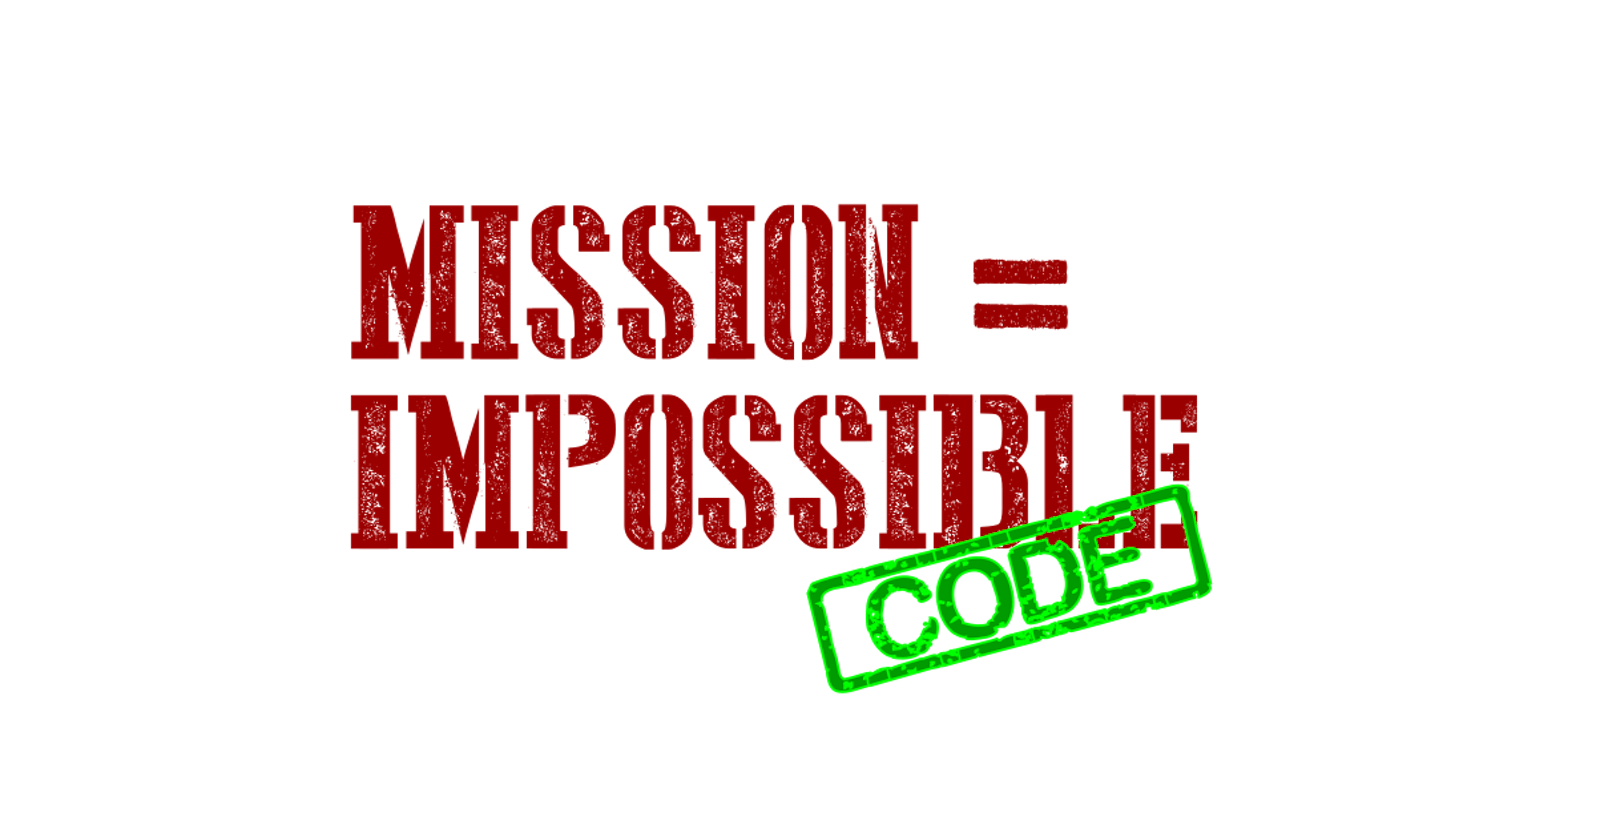 Mission Impossible Code - Hyper-planning + Hyper-pragmatism = Get the Job Done Every Time (Part 1)